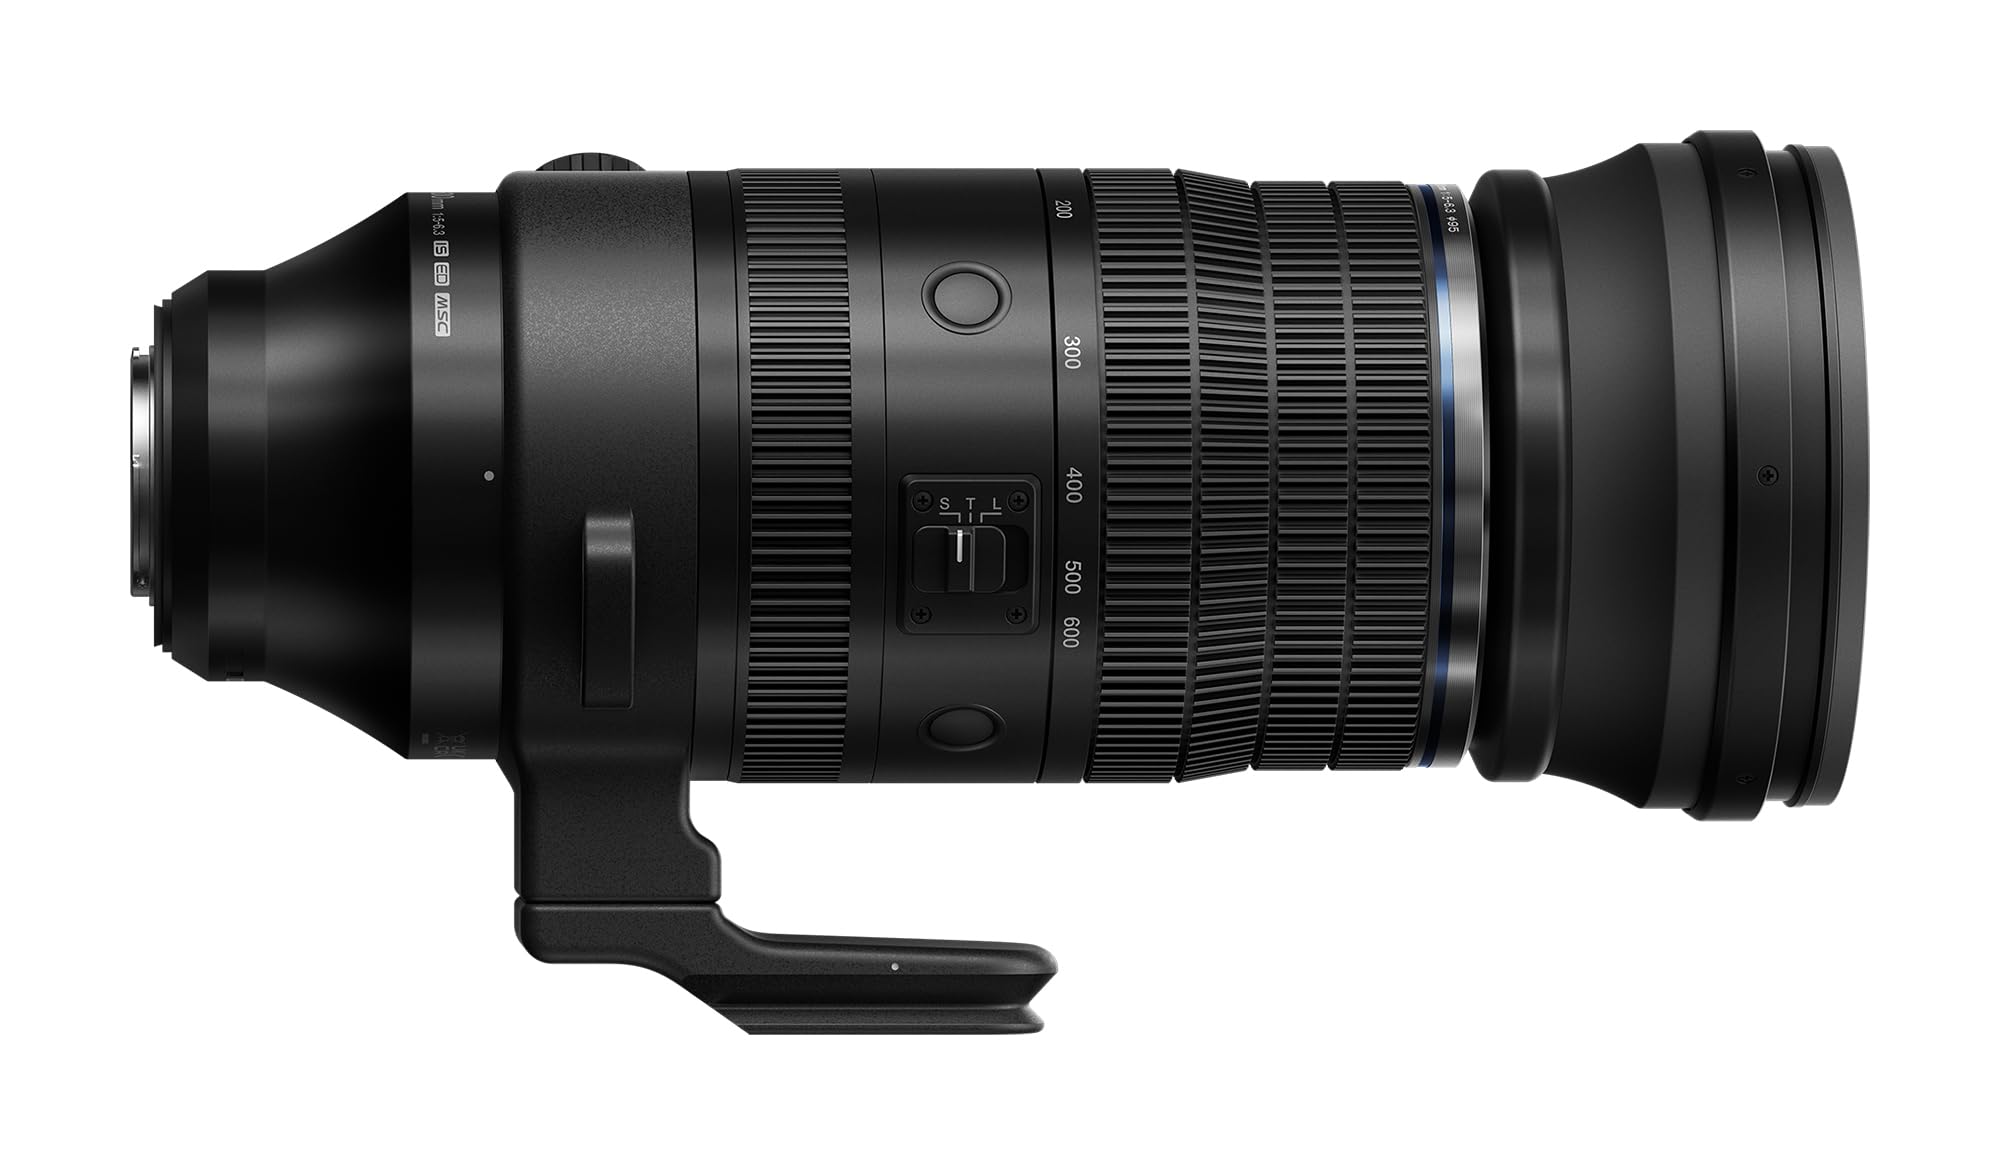 OM SYSTEM M.Zuiko Digital ED 150-600mm F5.0-6.3 is for Micro Four Thirds System Camera, Outdoor Bird Wildlife, Weather Sealed Design, Telephoto Compatible with Teleconverter